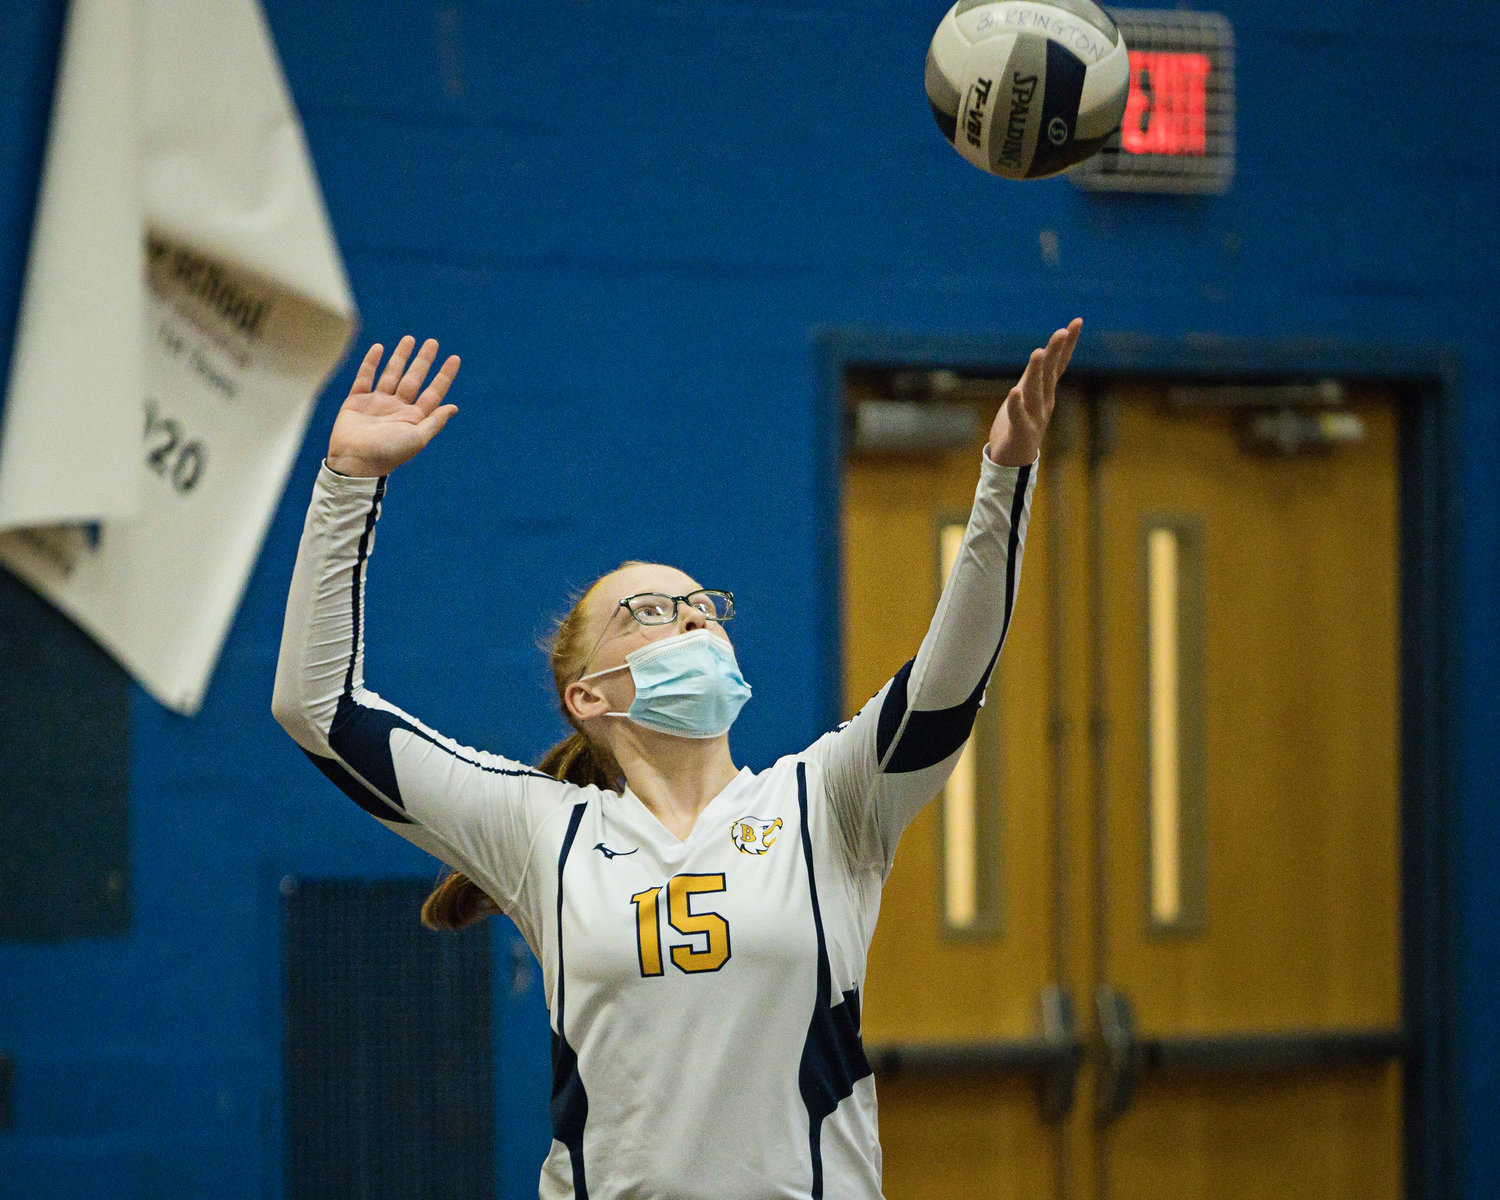 Nellie Peecher, shown during a match last year, is a senior member of the BHS girls volleyball team.